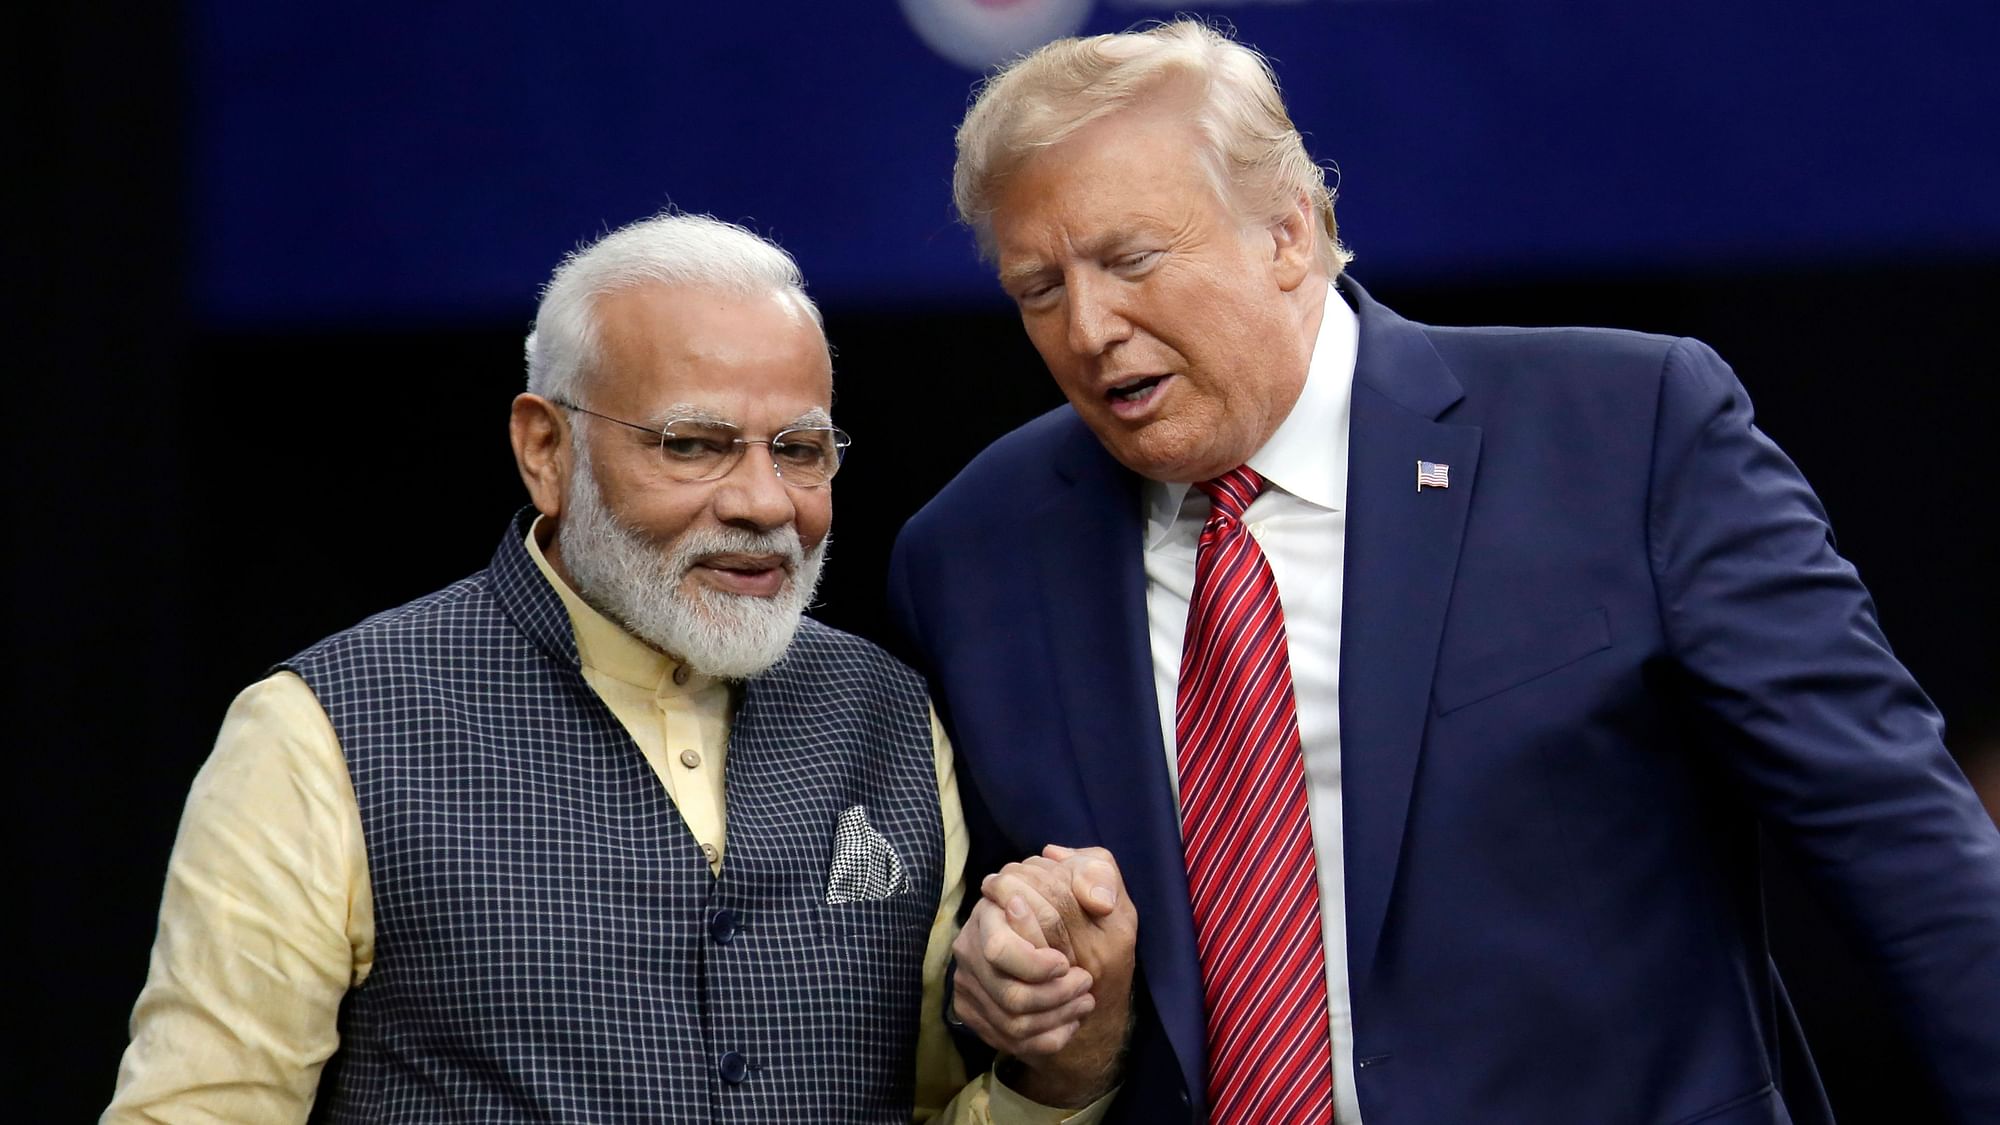  US President Donald Trump talked about India hosting two pre-season NBA matches next month.